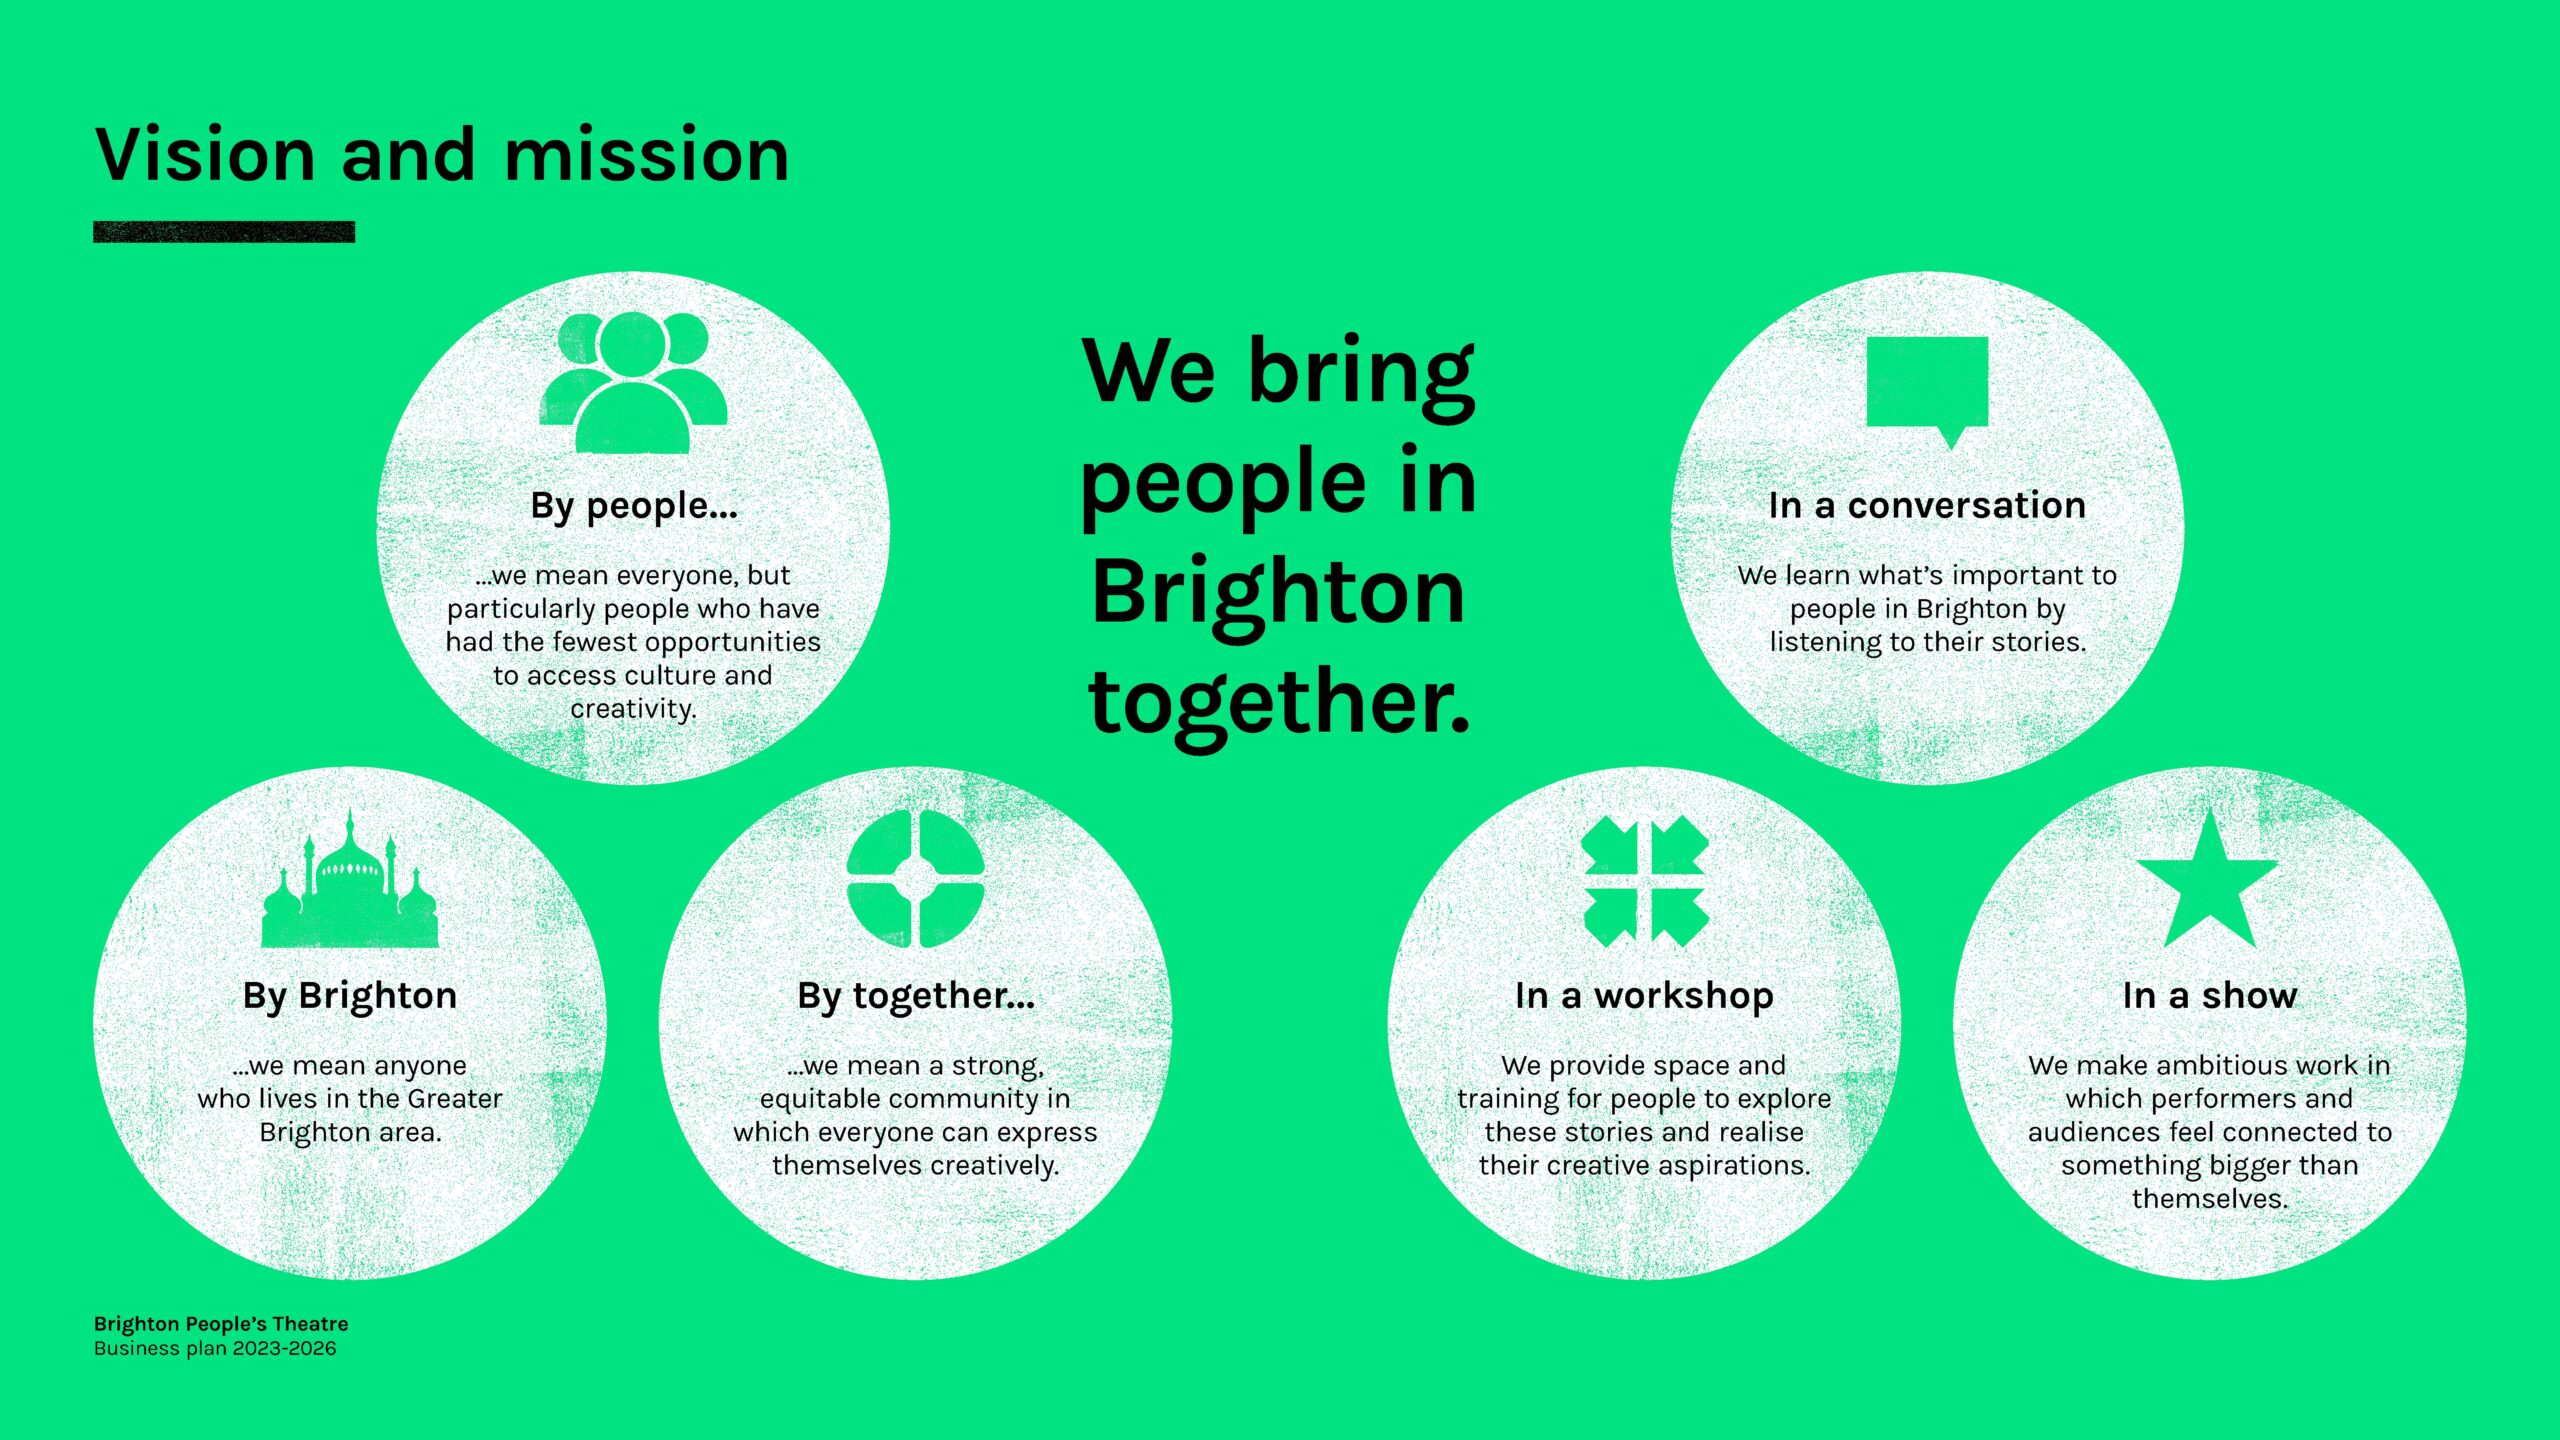 A green rectangle image with BPT's Vision and Mission overlayed in white circular boxes. In the centre of the image if black text are the words ' We bring people in Brighton together'. 